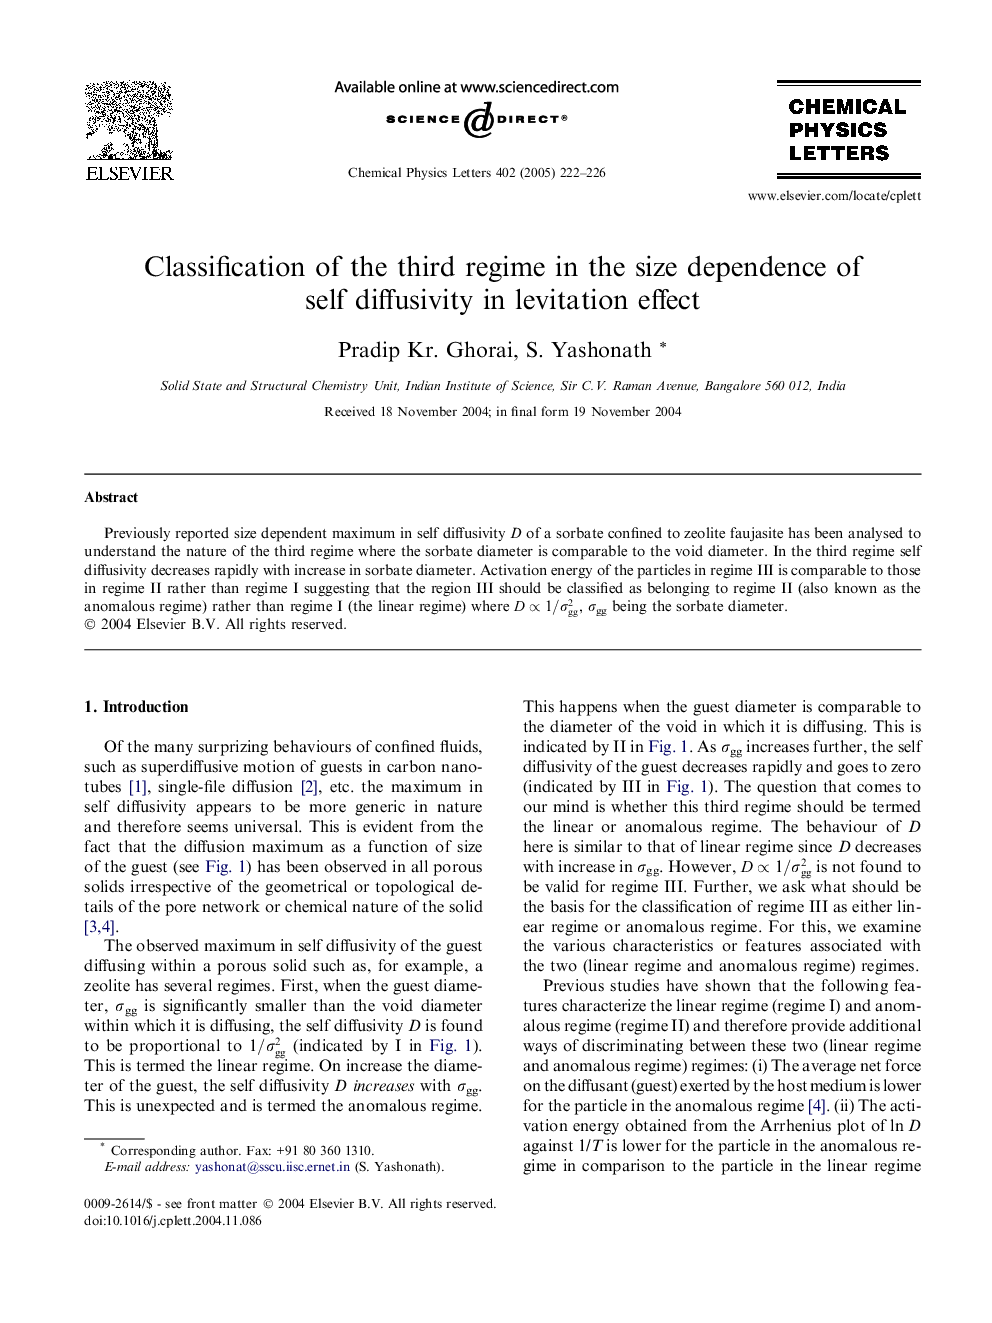 Classification of the third regime in the size dependence of self diffusivity in levitation effect